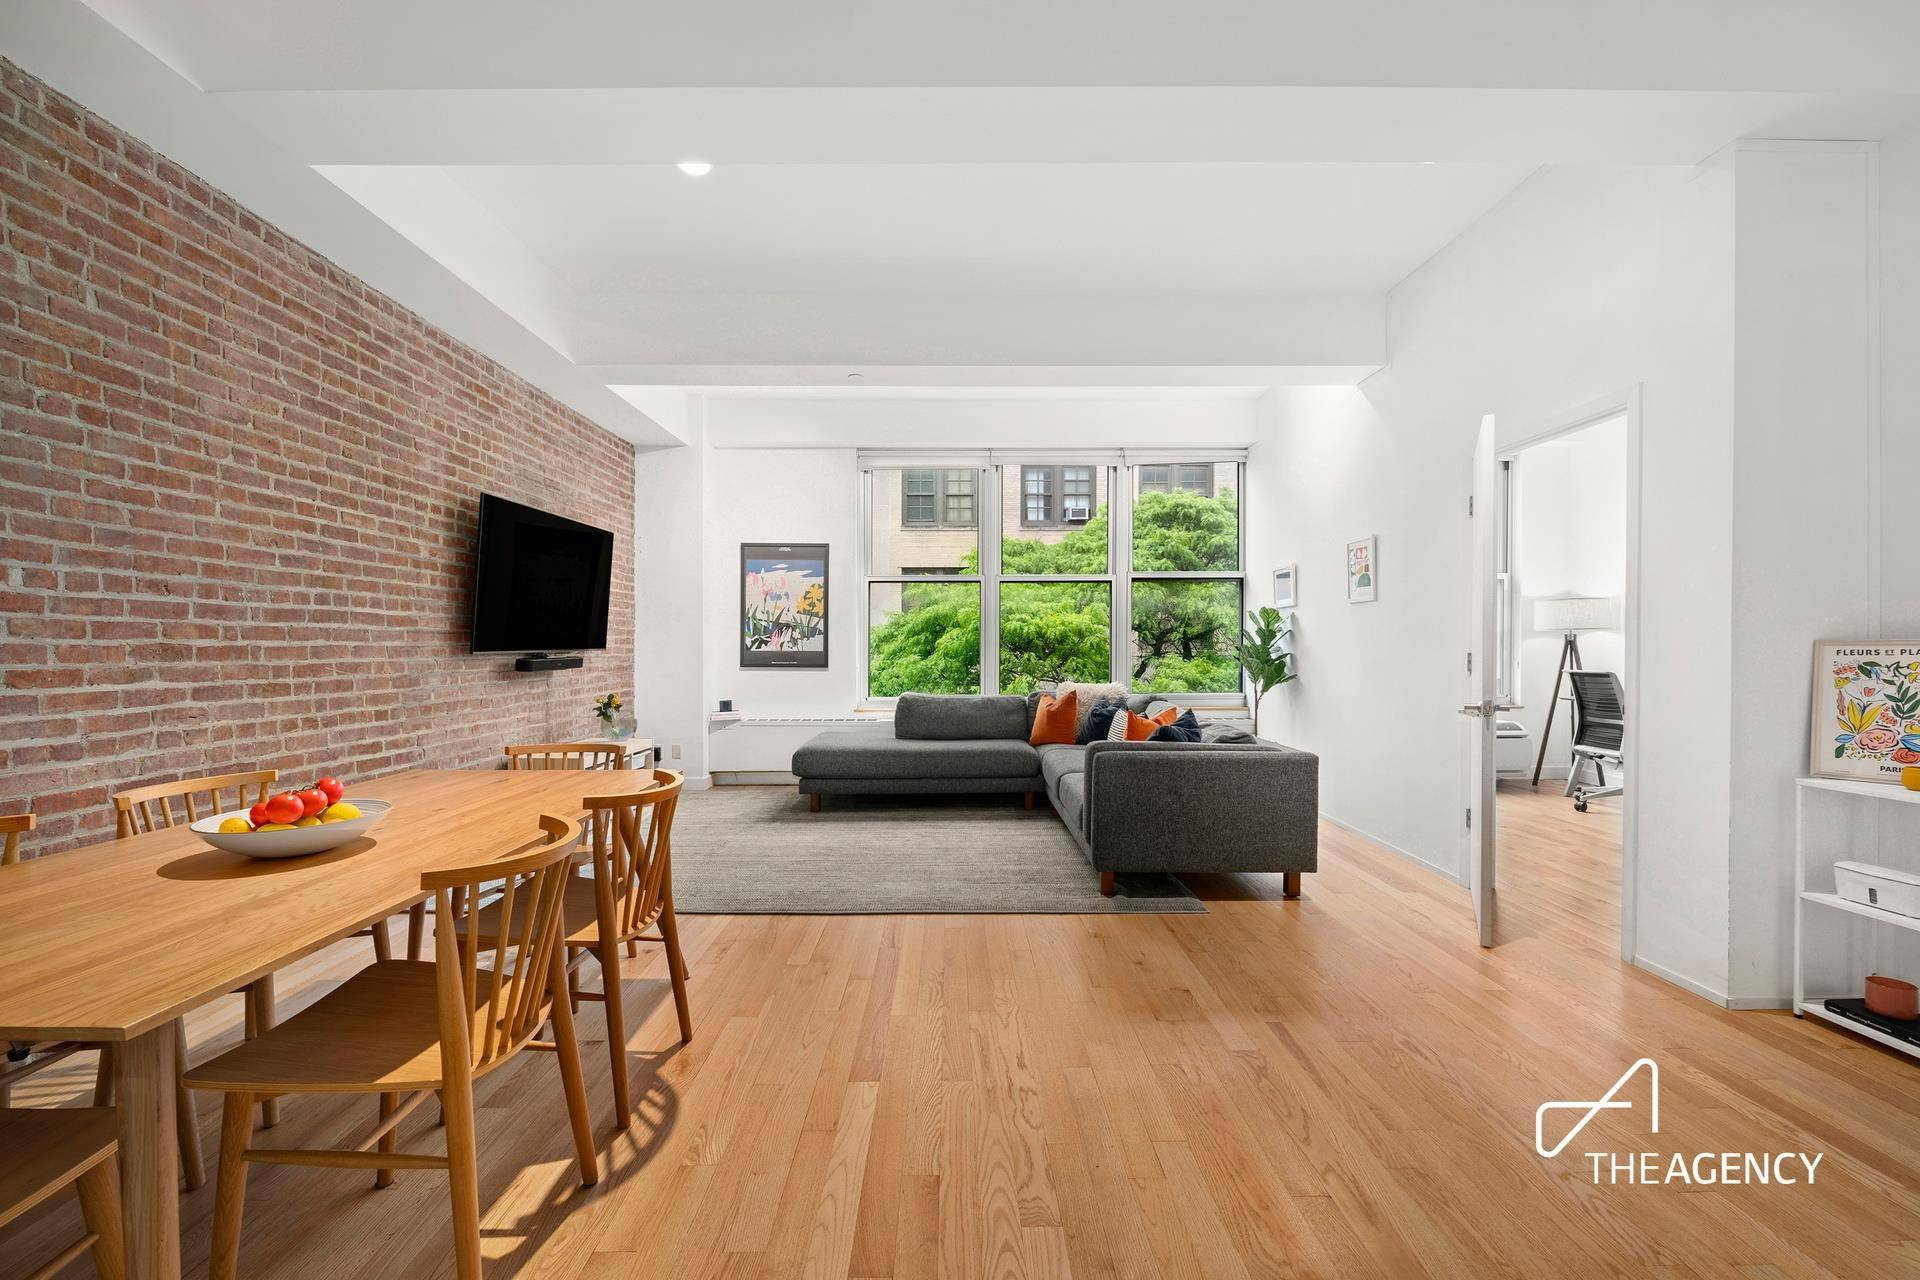 This modern and lofty three bedroom, two bathroom condo nestled in the heart of Boerum Hill is ready to be called home.